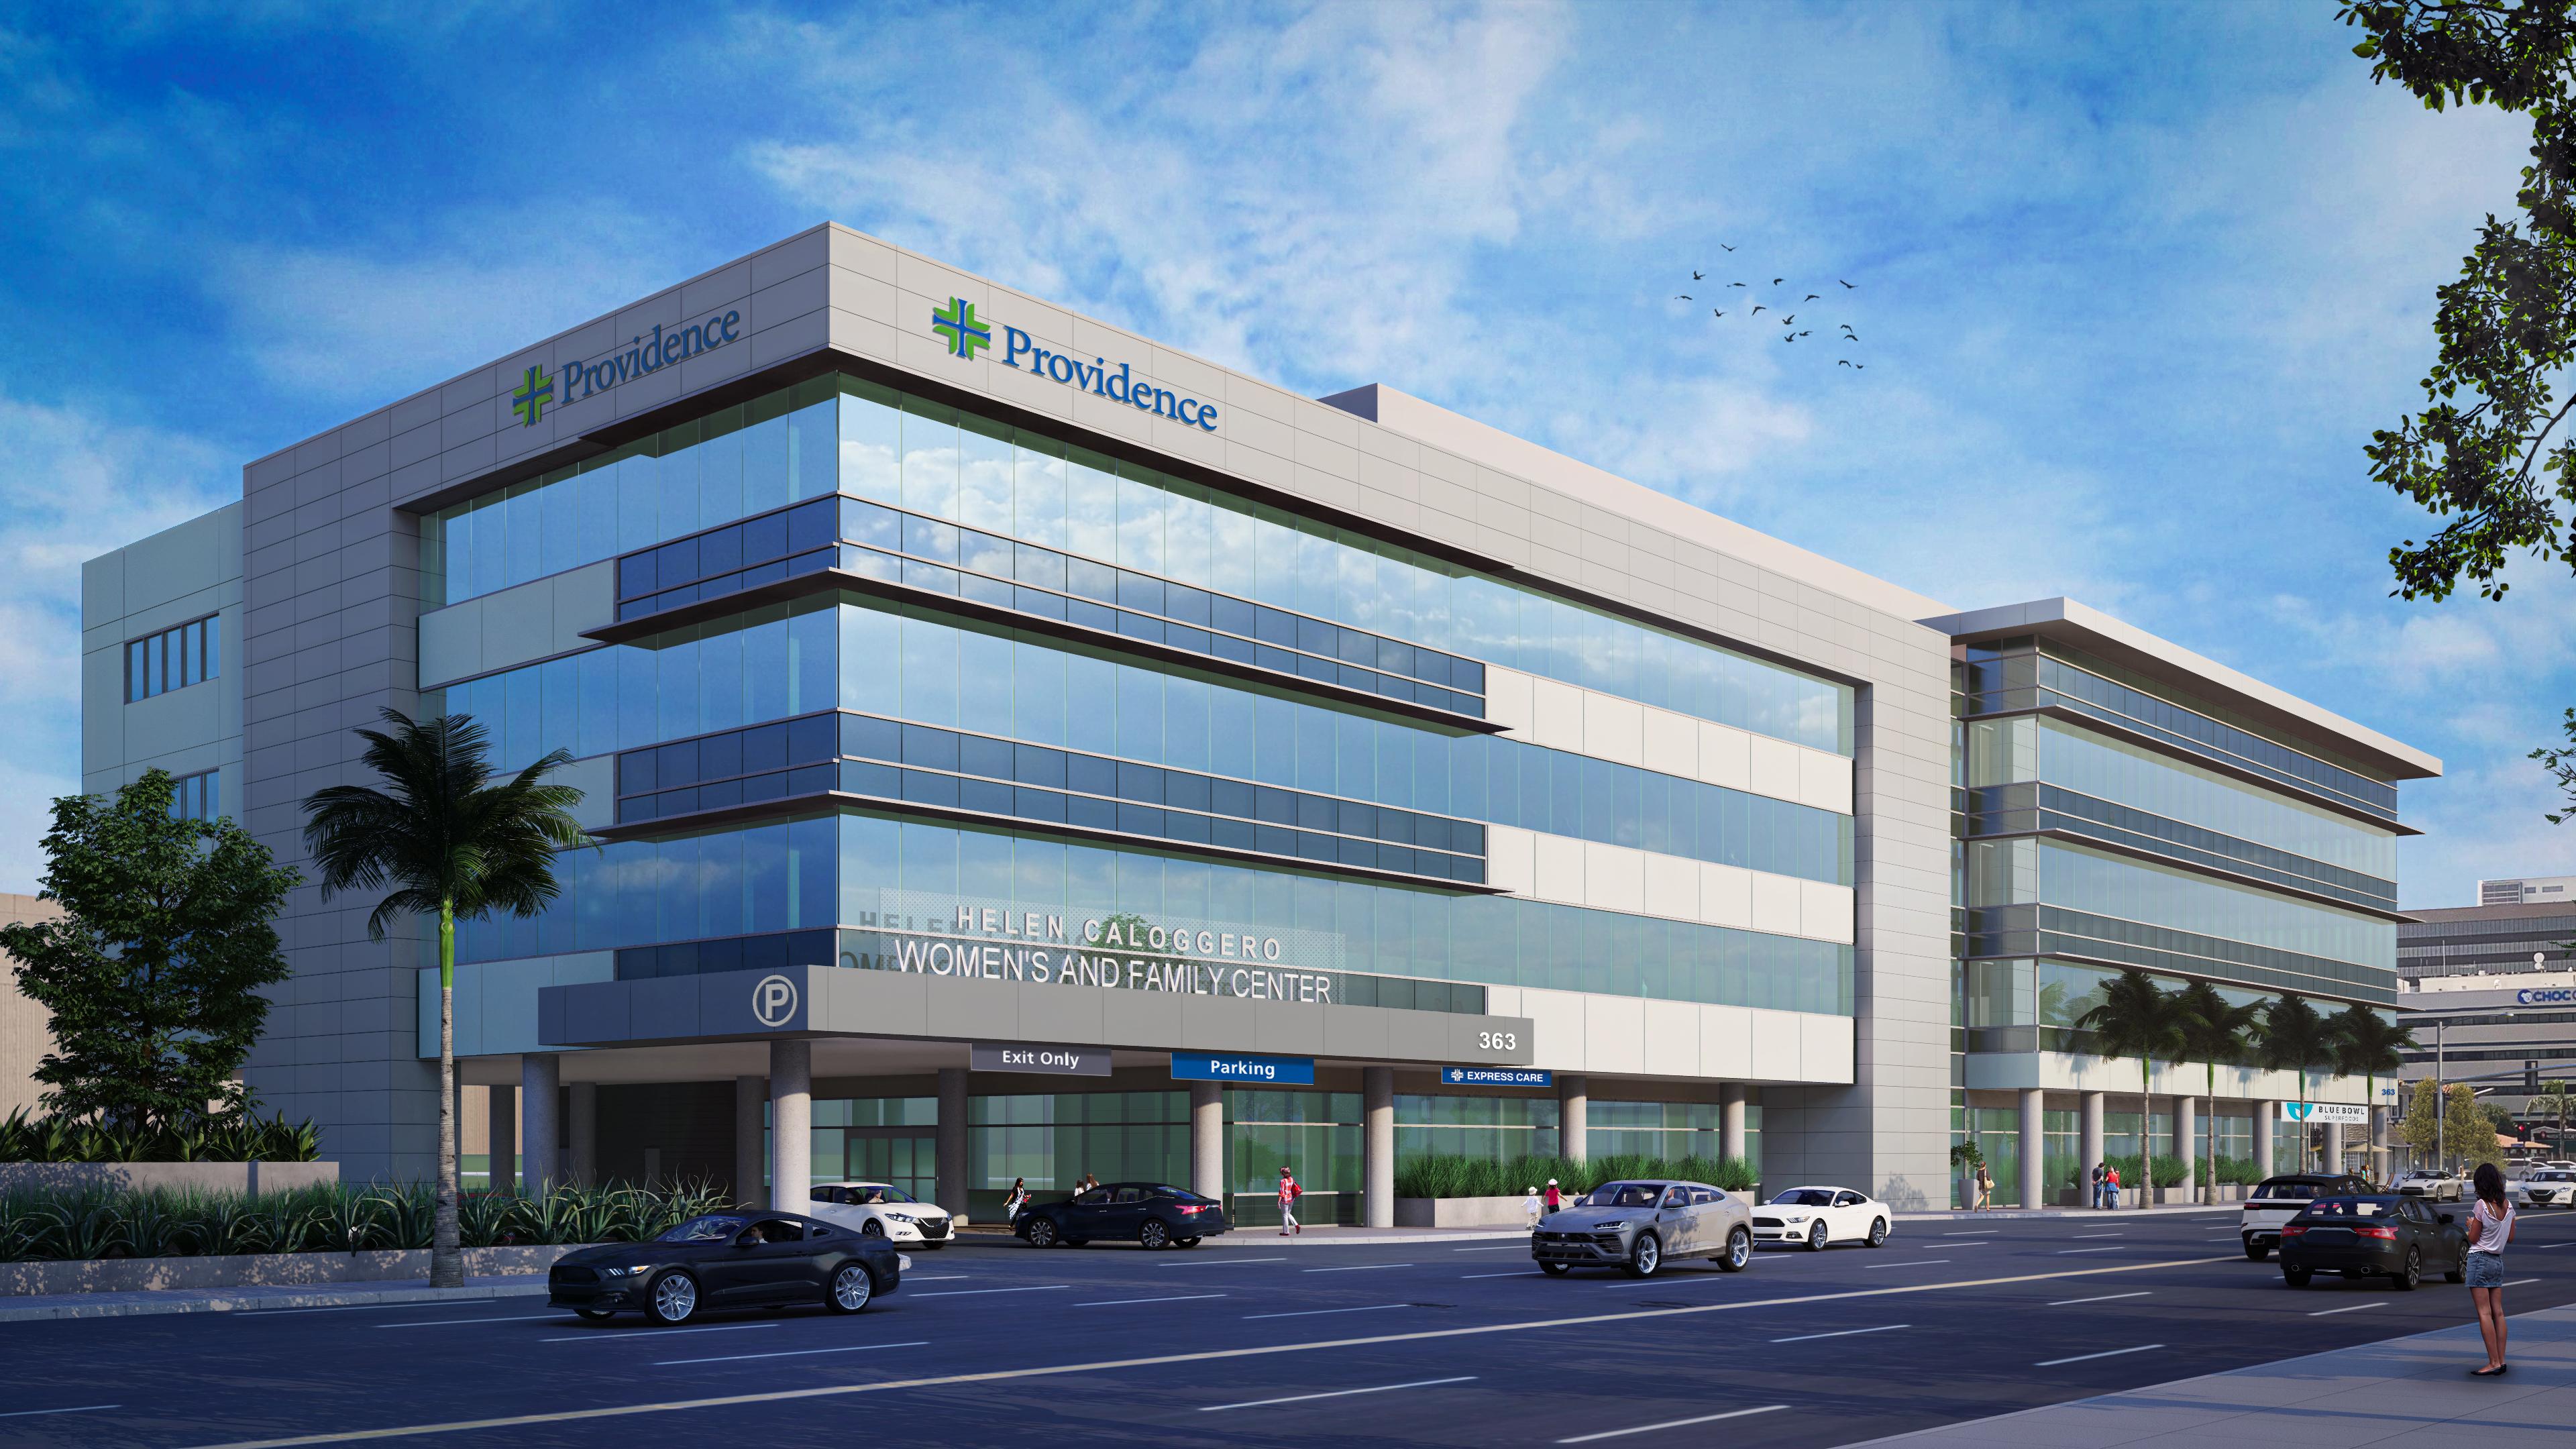 The new 137,000-square-foot, four-story Helen Caloggero Women’s & Family Center will be developed on the St. Joseph Hospital medical campus in Orange, Calif. It is expected to be completed in the thir